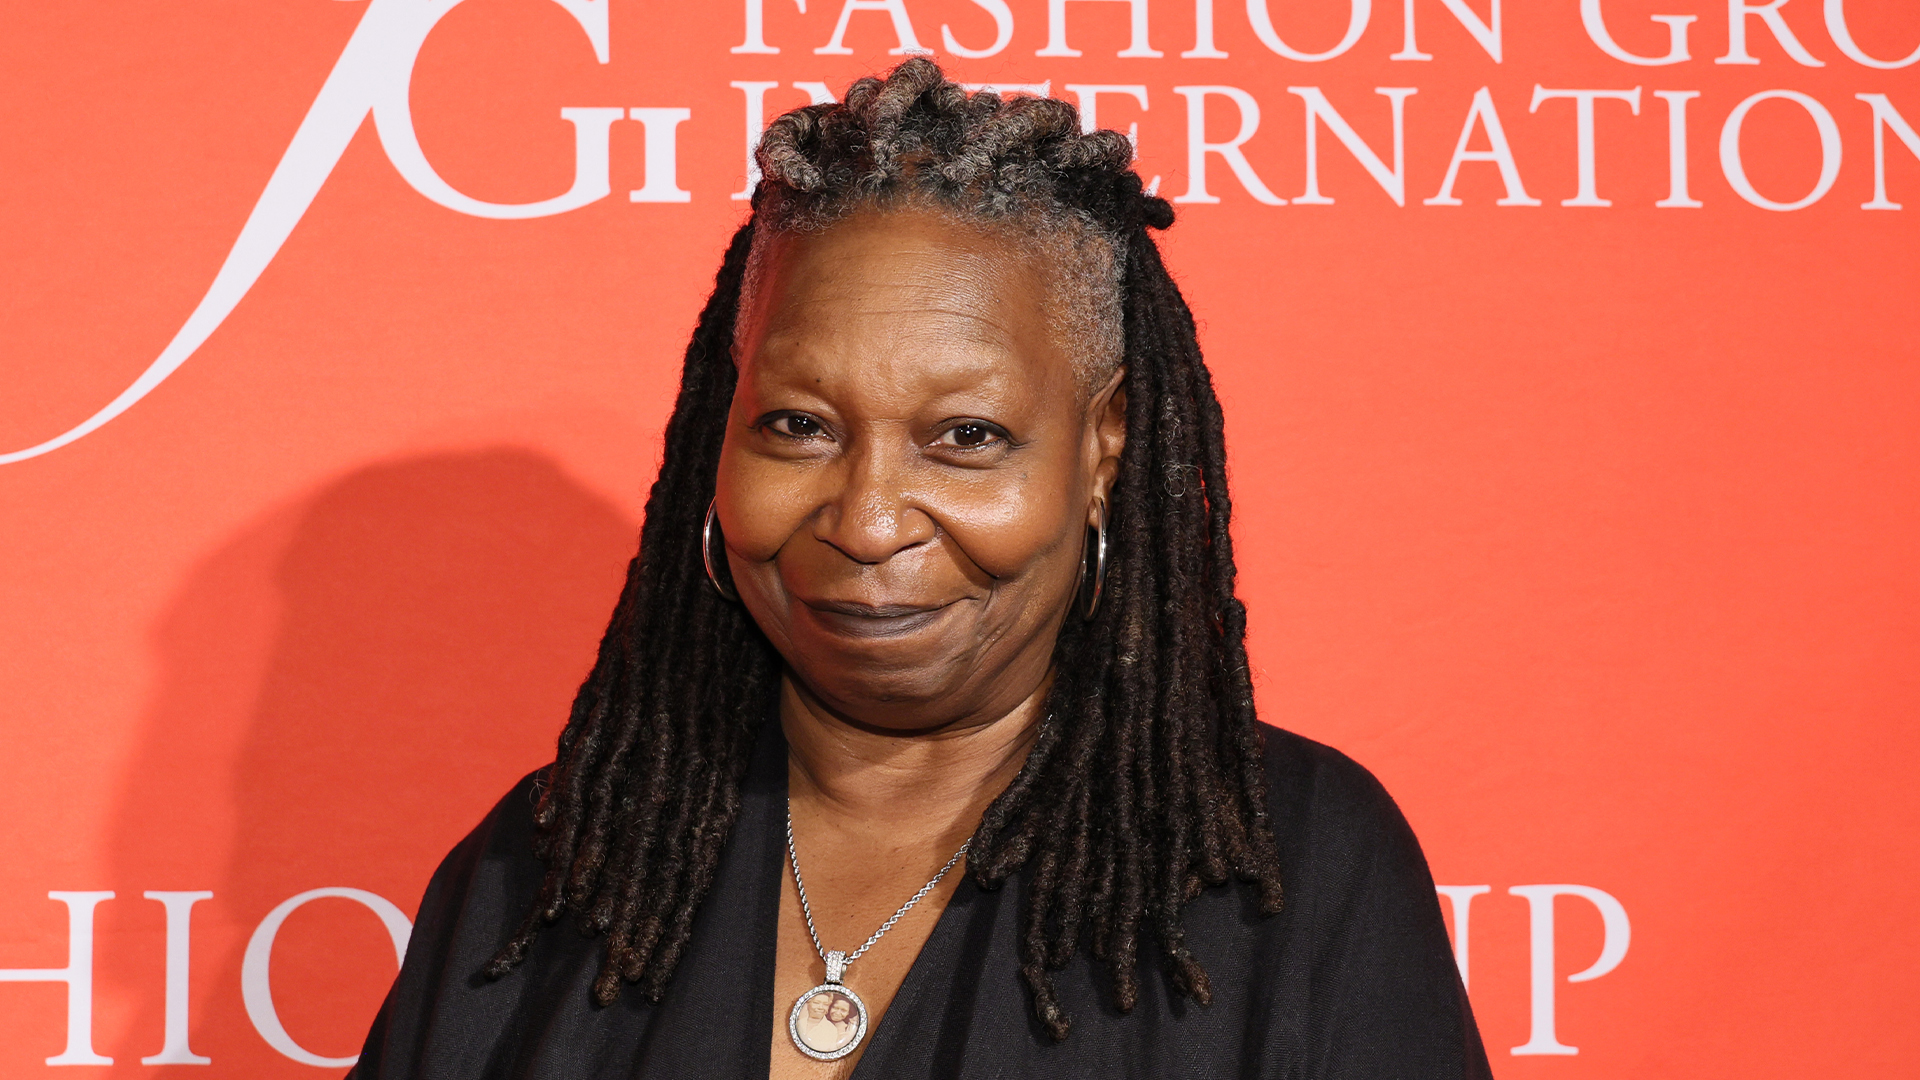 Whoopi Goldberg Invests In Blkfam, A Streaming Platform Catering To Black Communities, Founded By Digital Marketing And Media Vet Larry Adams